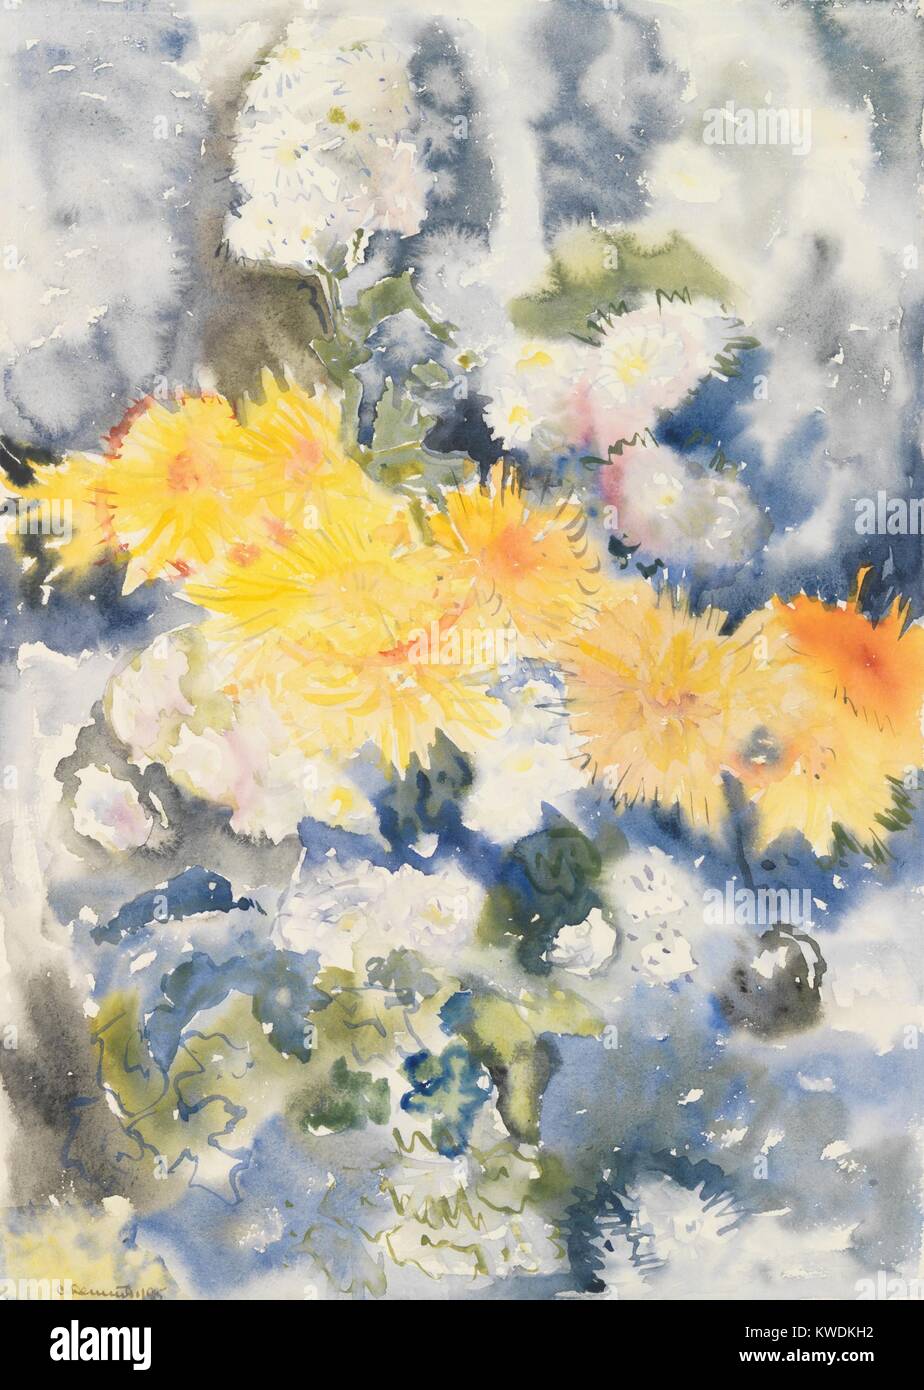 YELLOW AND BLUE, by Charles Demuth, 1915, American painting, watercolor on paper. The title hints at the artists formal intentions, of composing a work with bright yellow flowers against soft shapes with cool colors of blue and green (BSLOC_2017_7_90) Stock Photo